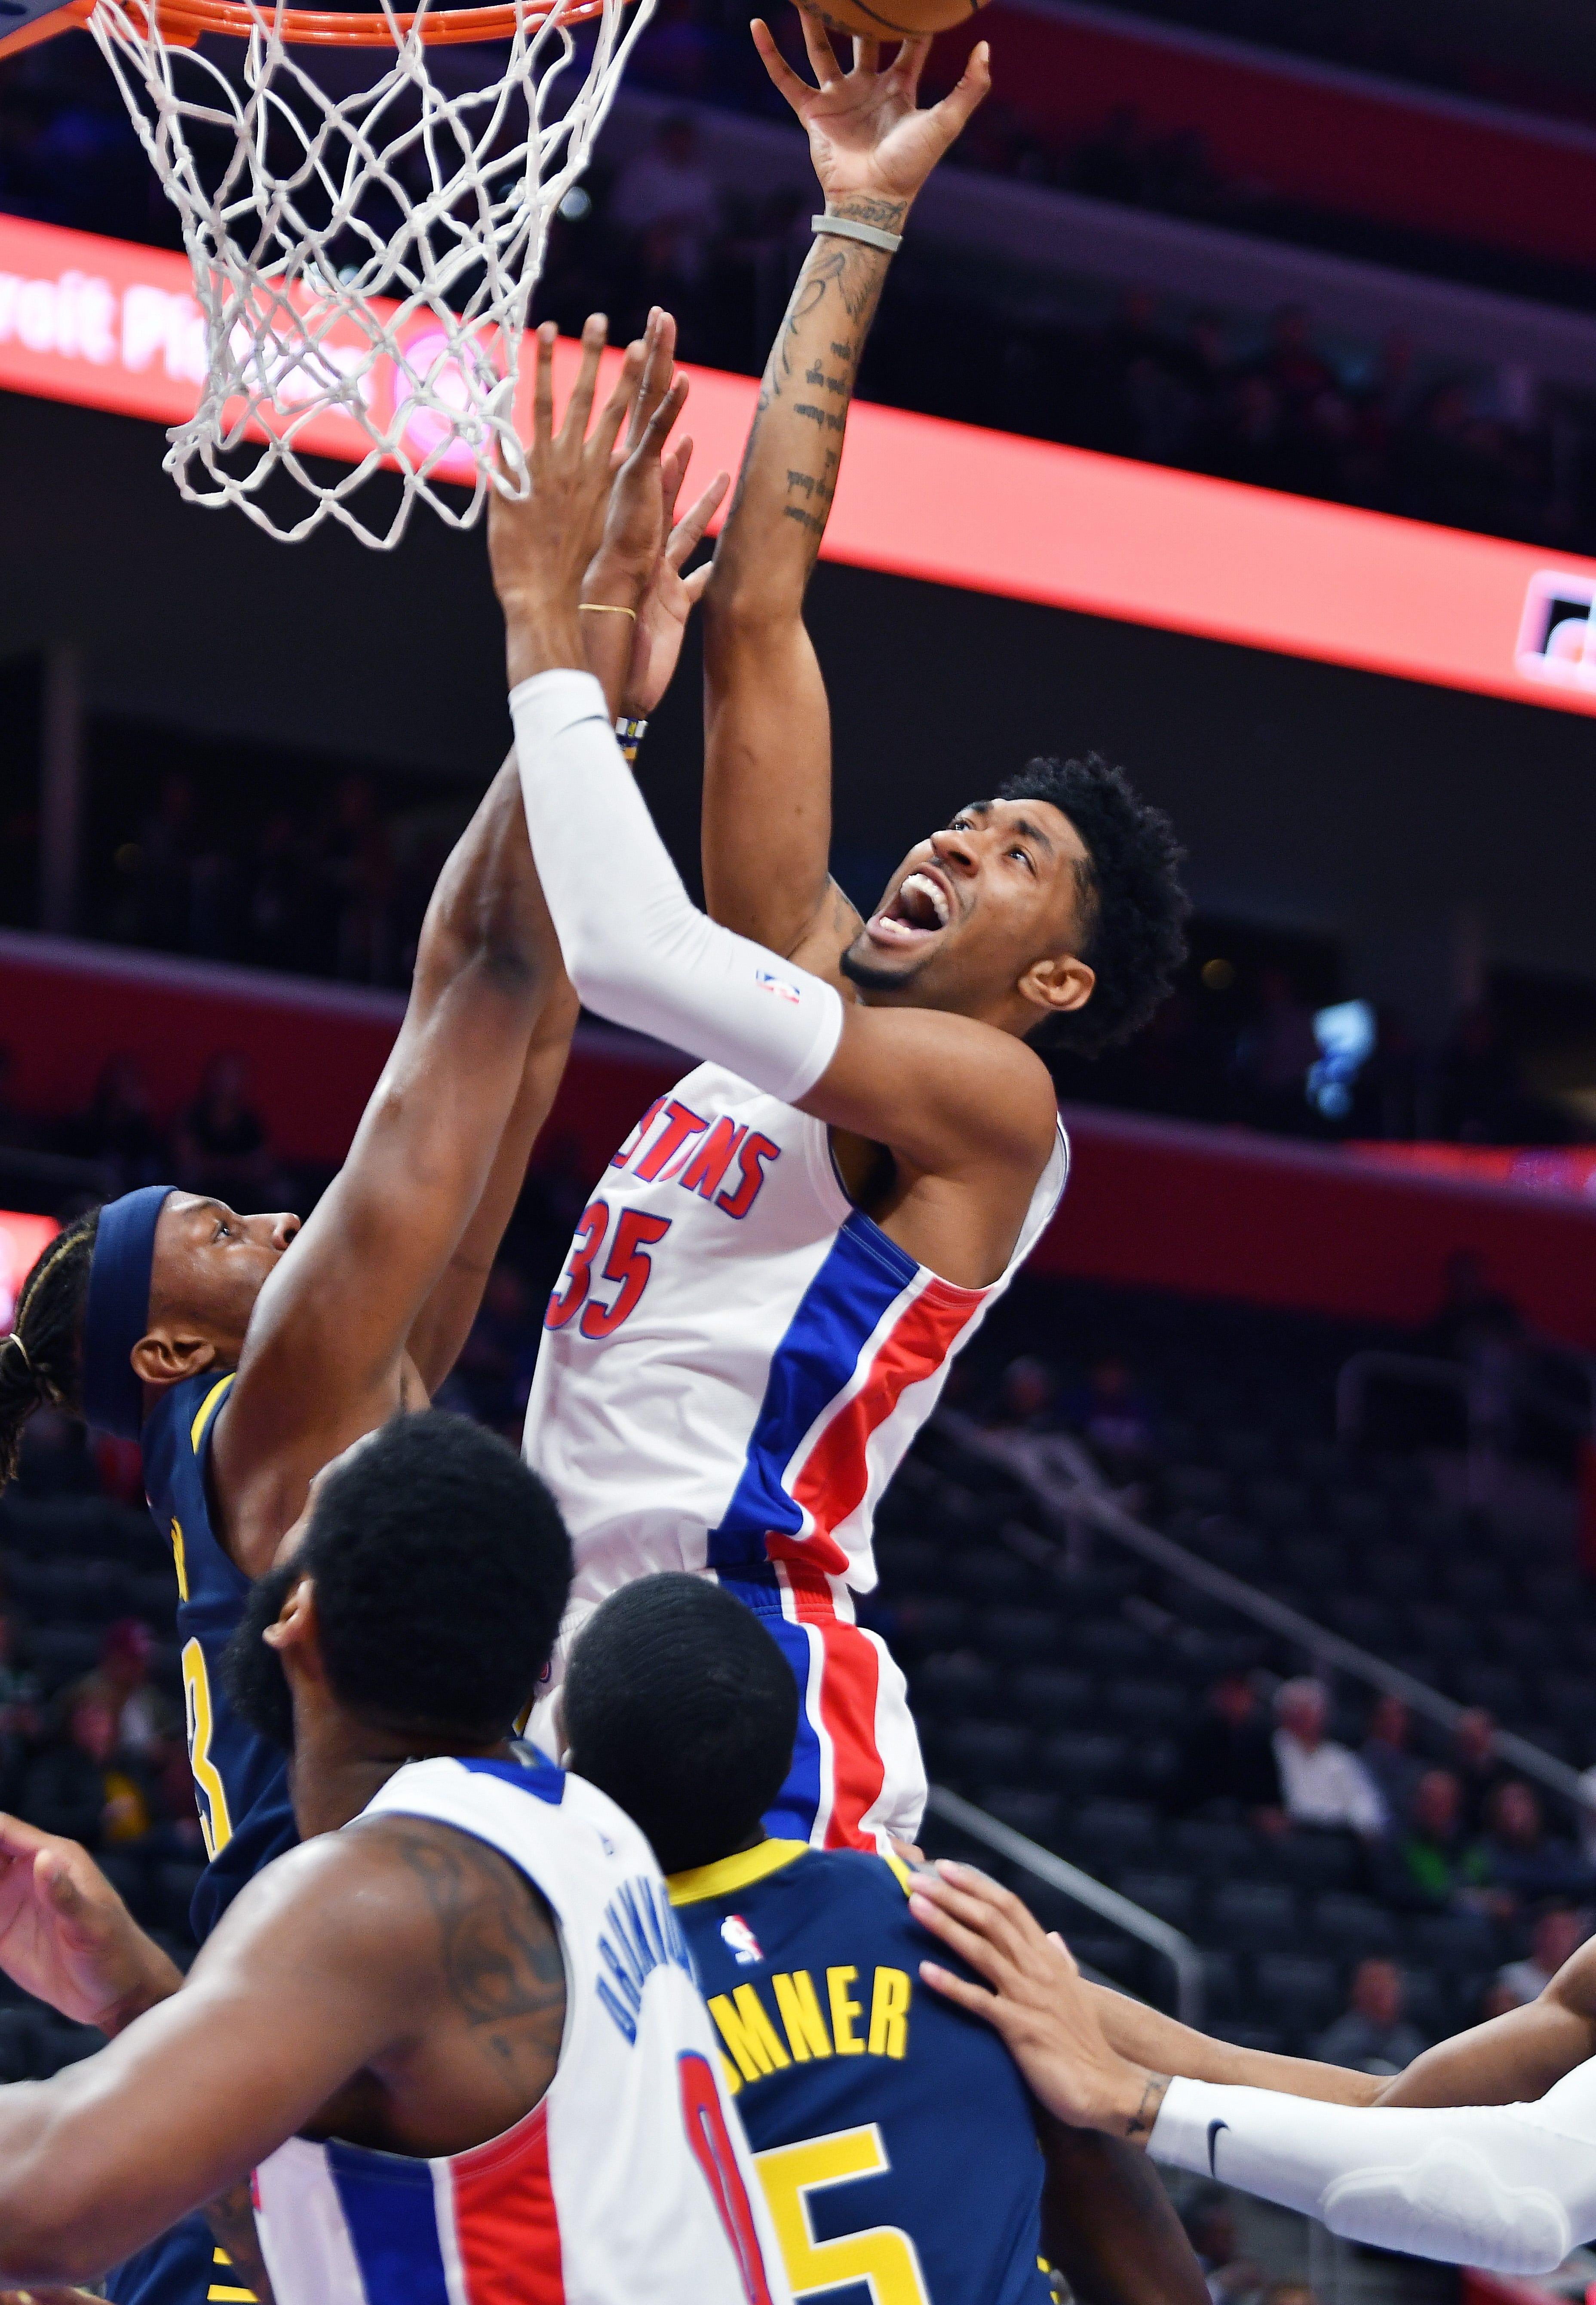 Pistons' Christian Wood scores over Pacers' Myles Turner in the first quarter.